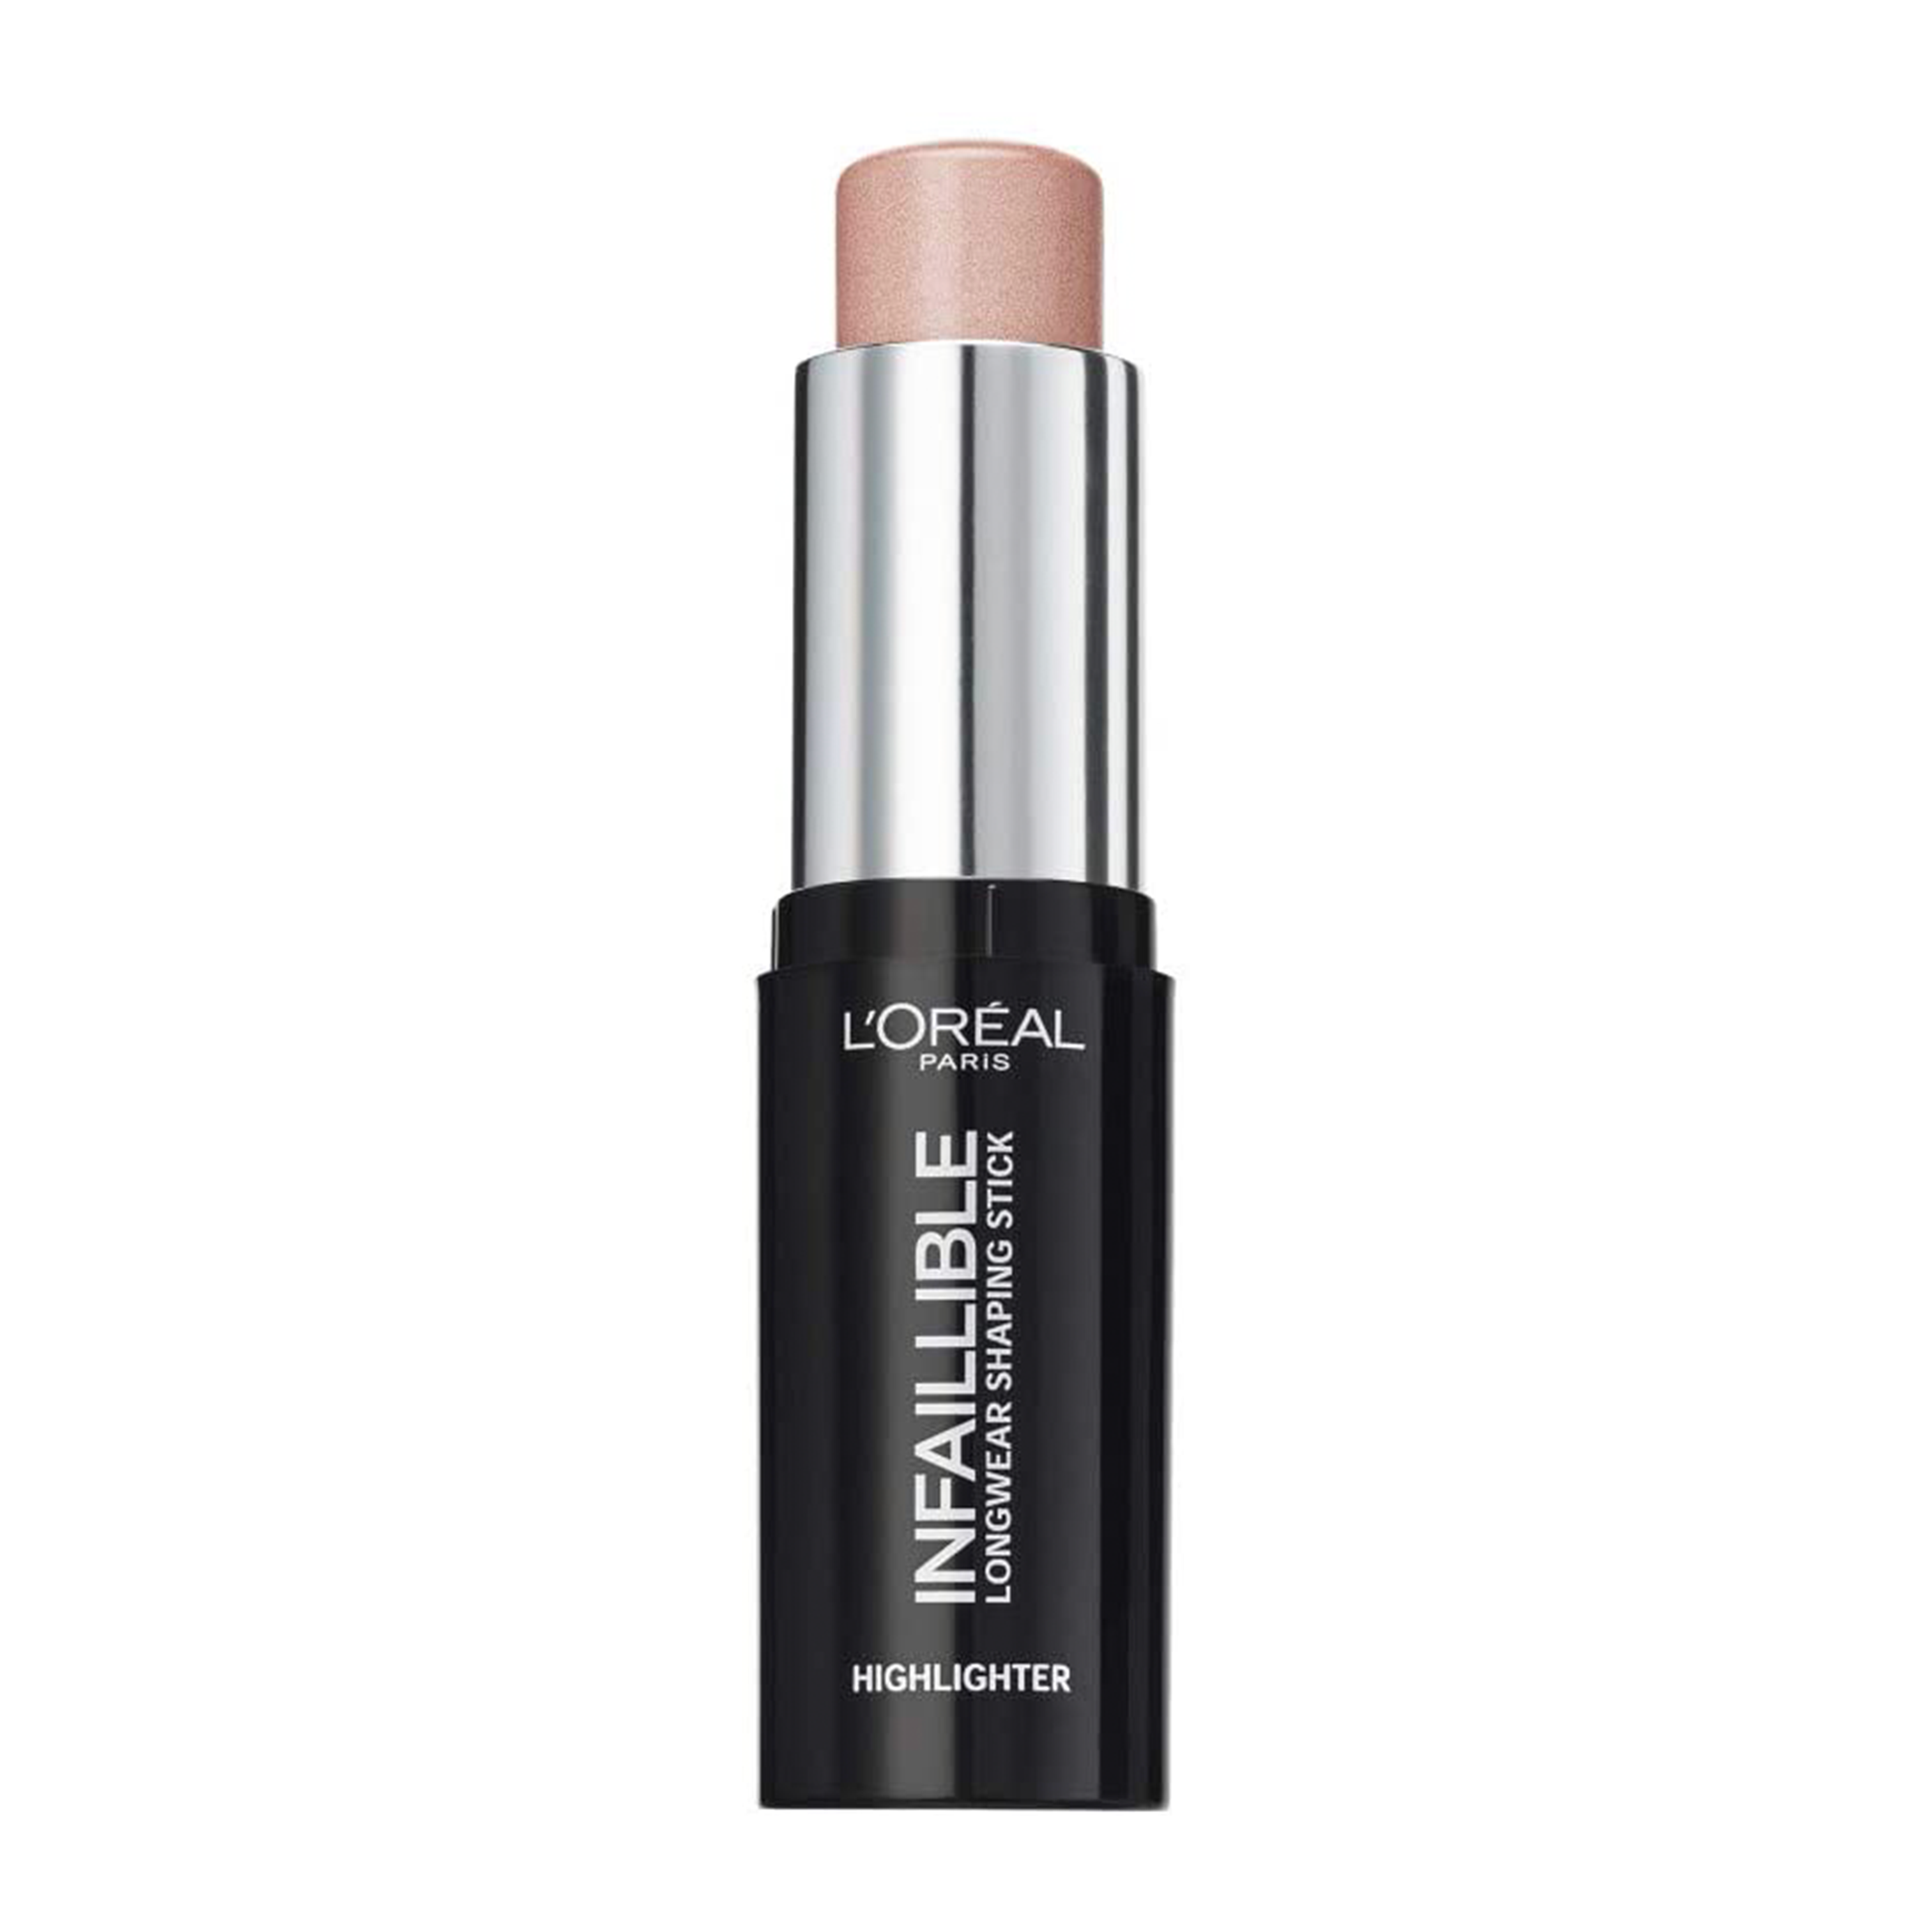 [B-GRADE] L'Oreal Infaillible Longwear Shaping Stick Highlighter Stick - 501 Oh My Jewels